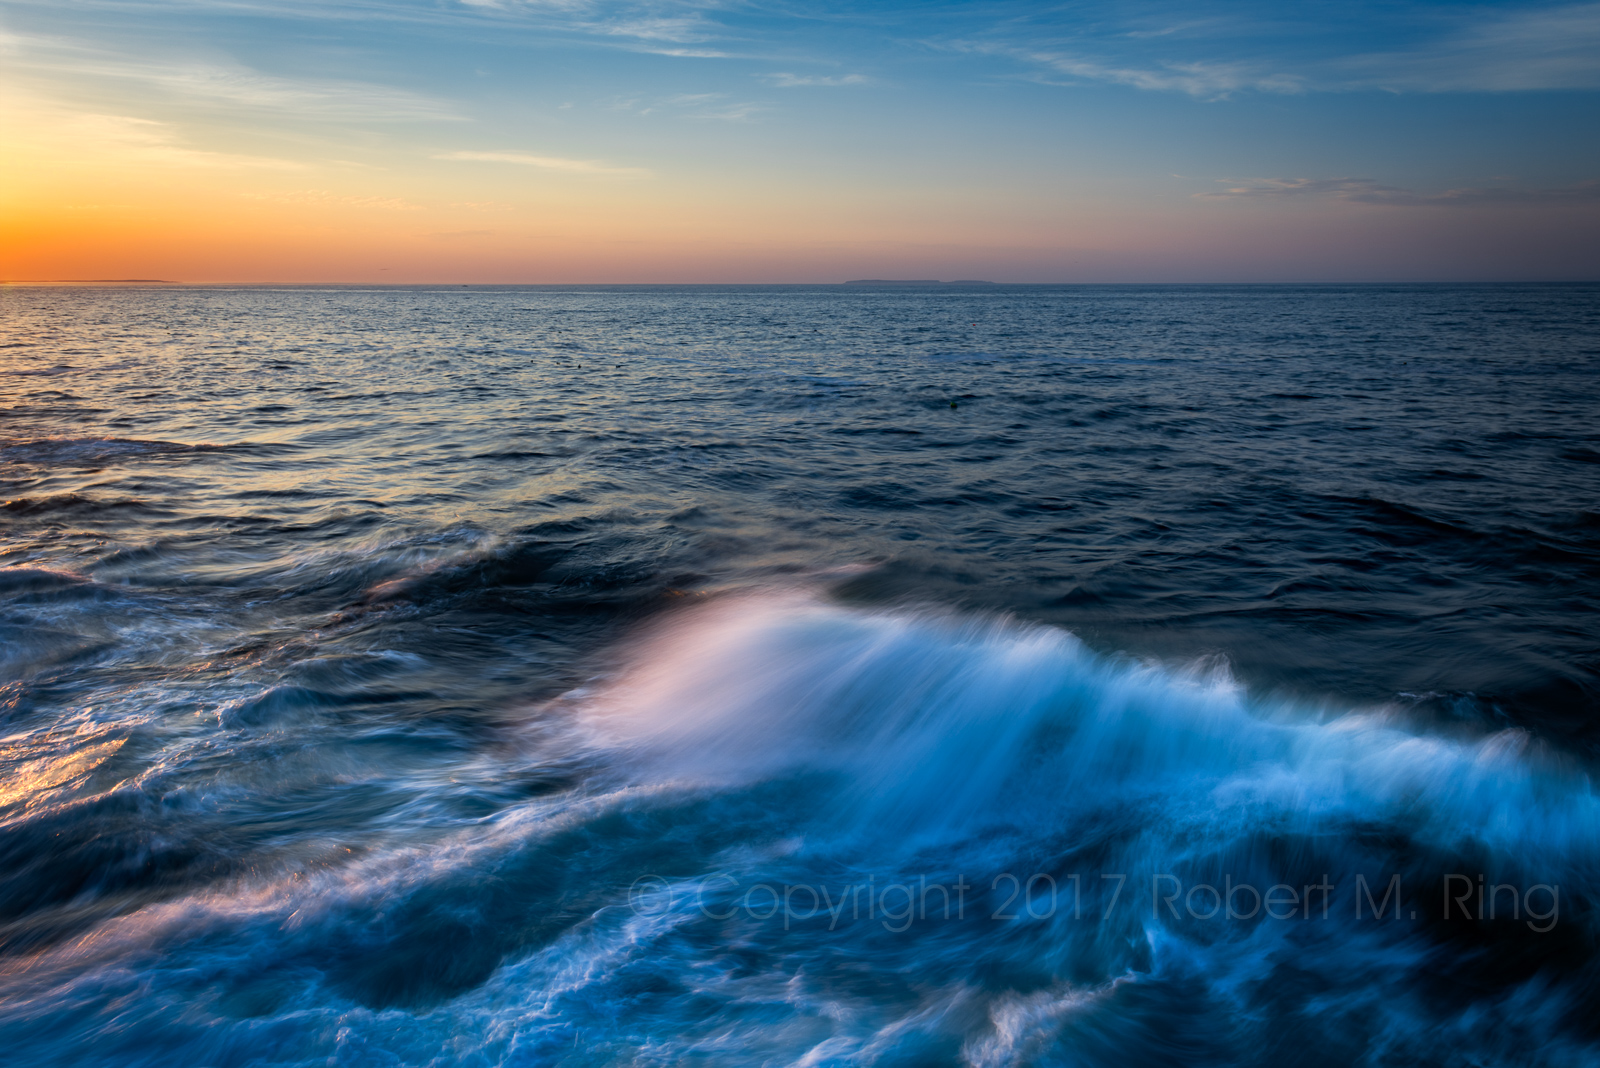 Another image of just waves and their action at Pemaquid Point.